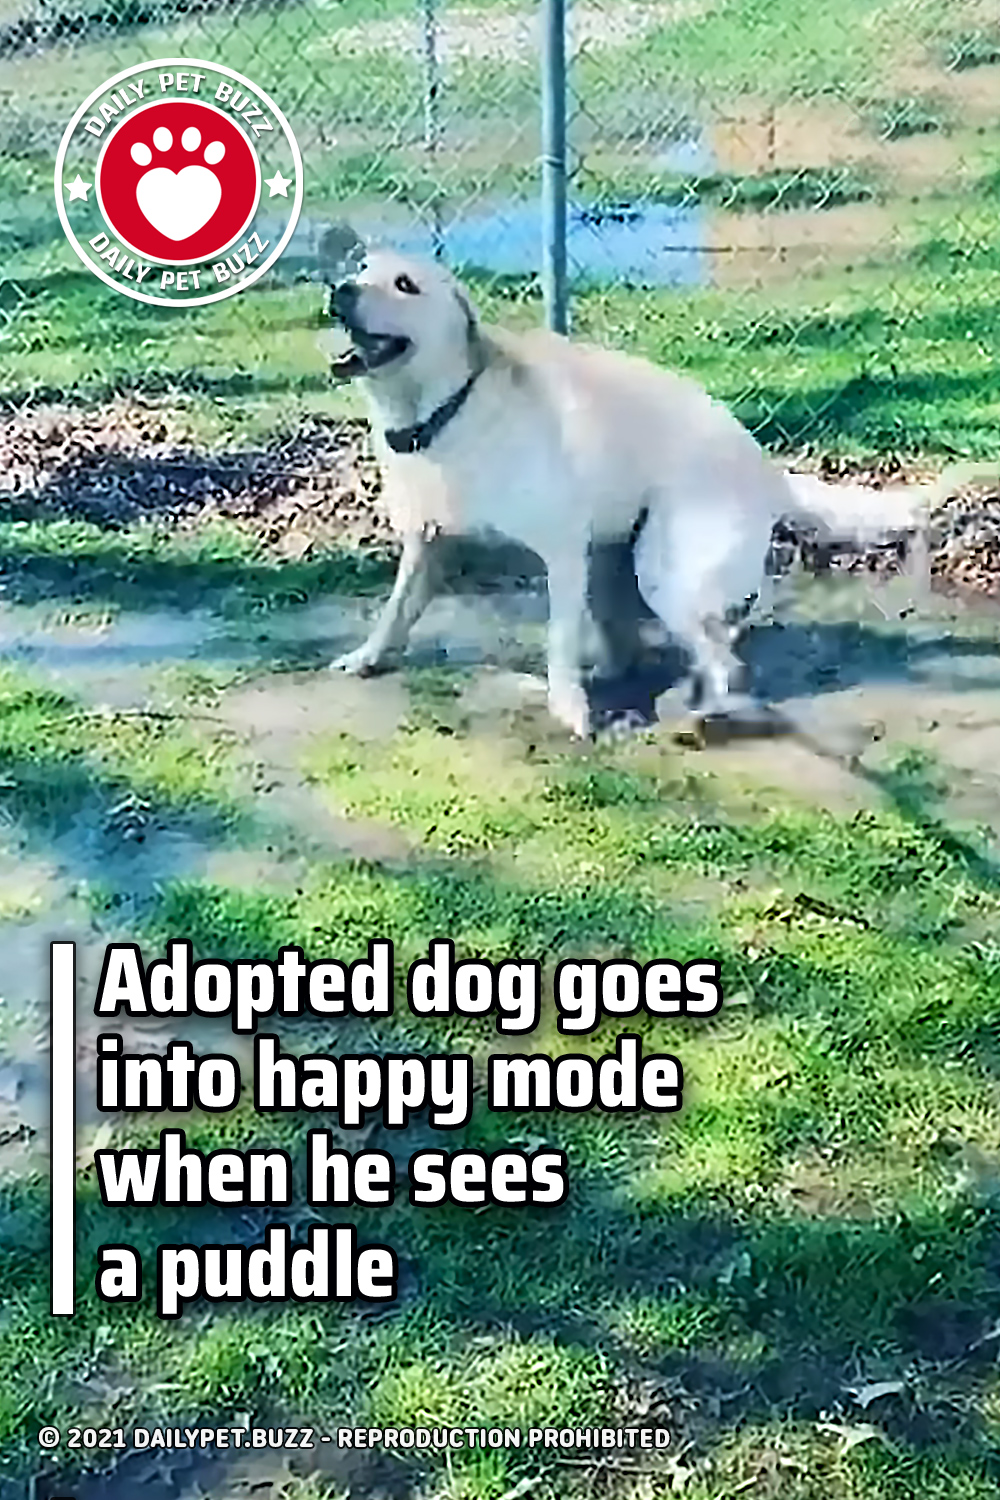 Adopted dog goes into happy mode when he sees a puddle